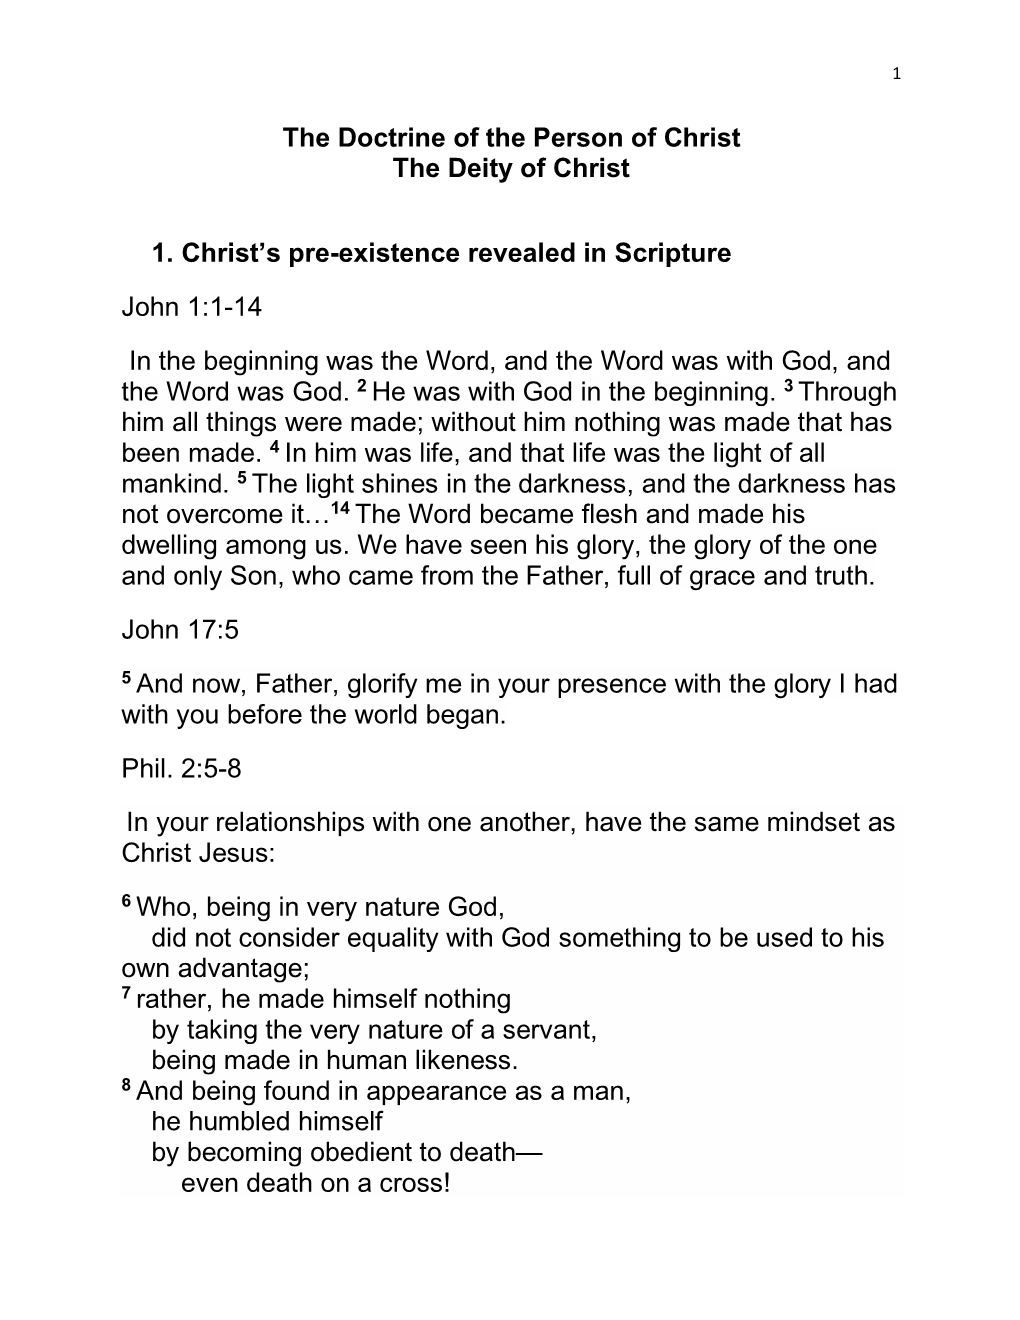 The Doctrine of the Person of Christ the Deity of Christ 1. Christ's Pre